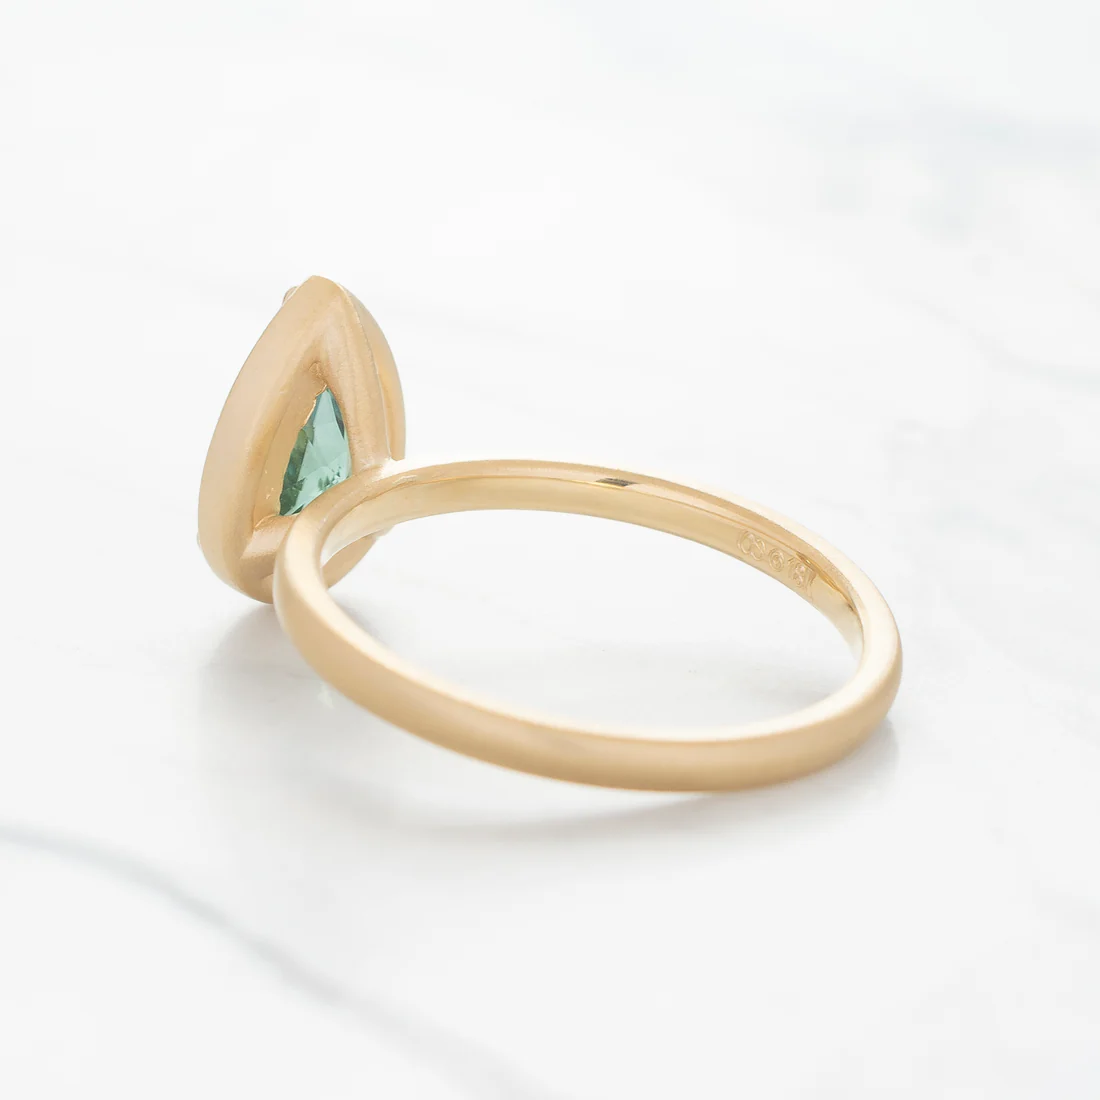 No.30 'Archive' 1.49ct Pear Green Tourmaline Ring | Magpie Jewellery